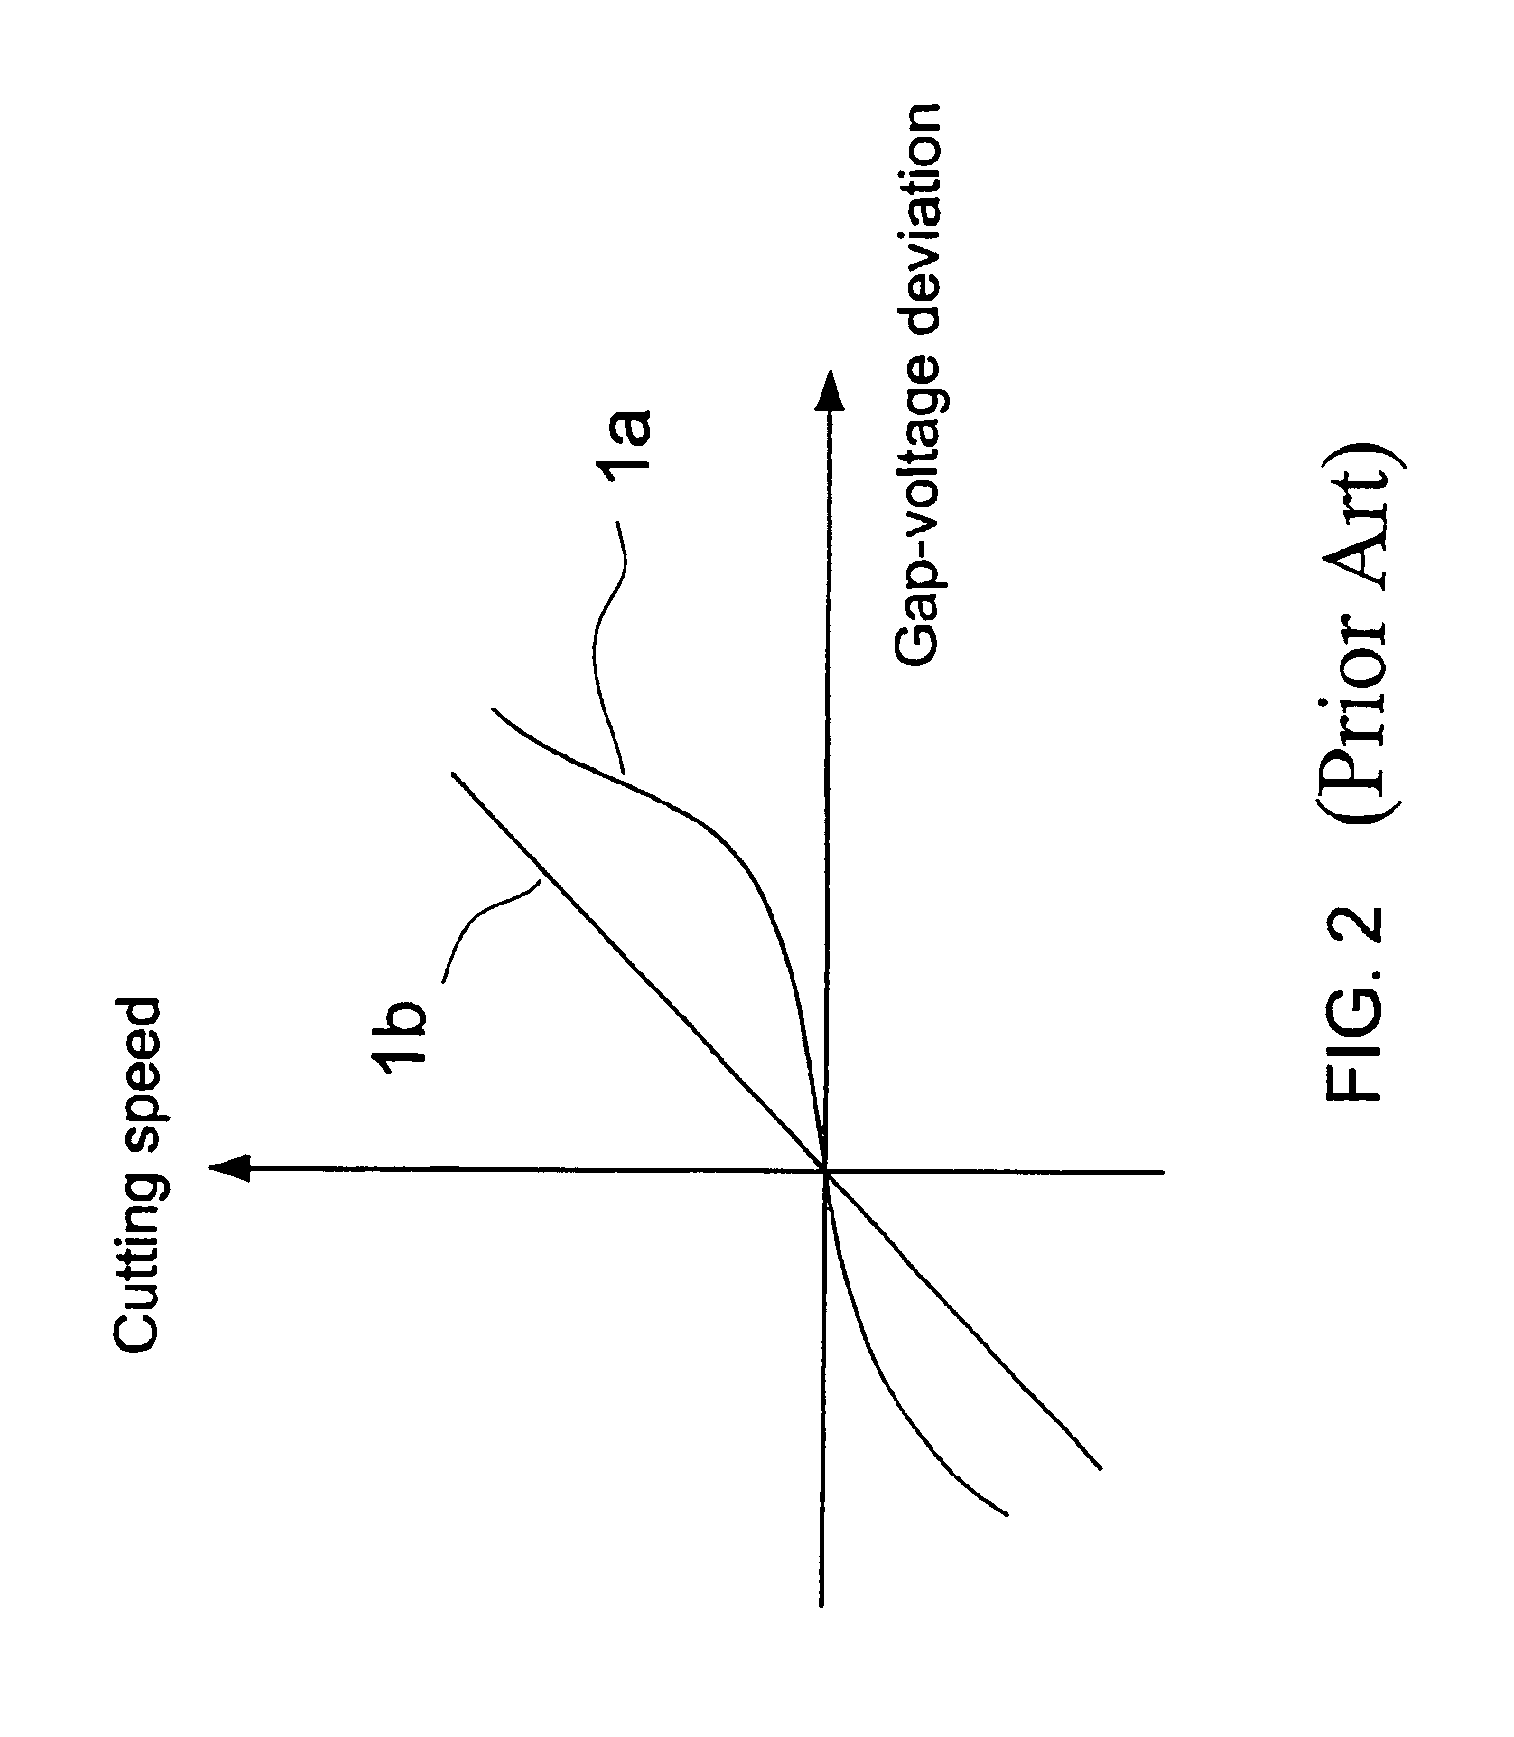 Multiple discharge-servo curve control method and device for an electrical discharge machine